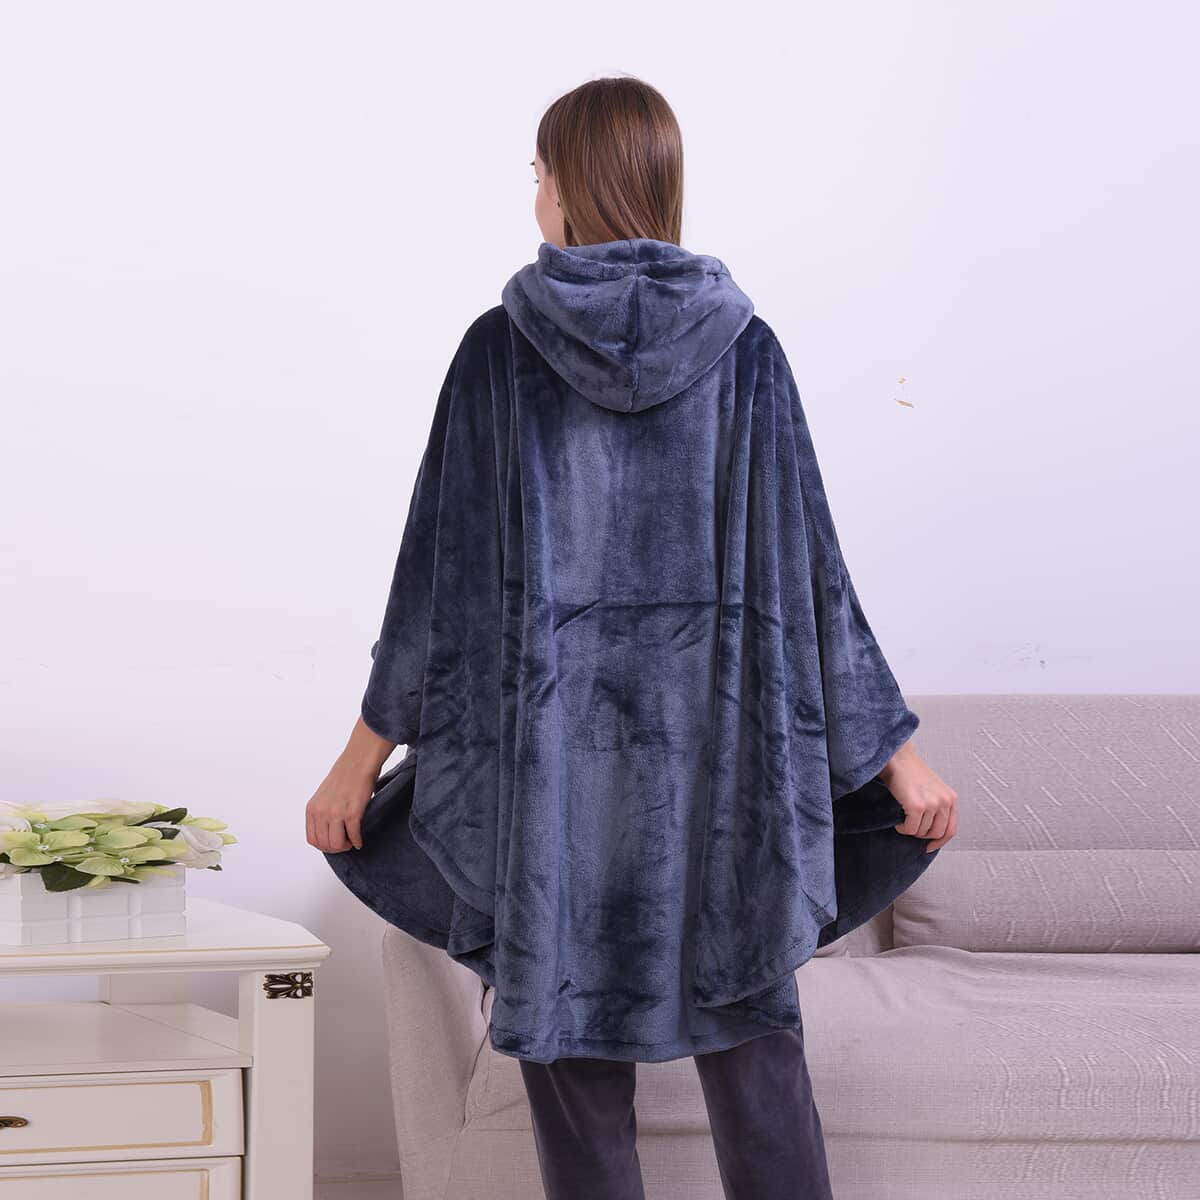 HOMESMART Pewter 100% Polyester Flannel Hooded Moon Shape Robe with Zipper (One Size) and Matching Anti Slip Rubber Slippers image number 1